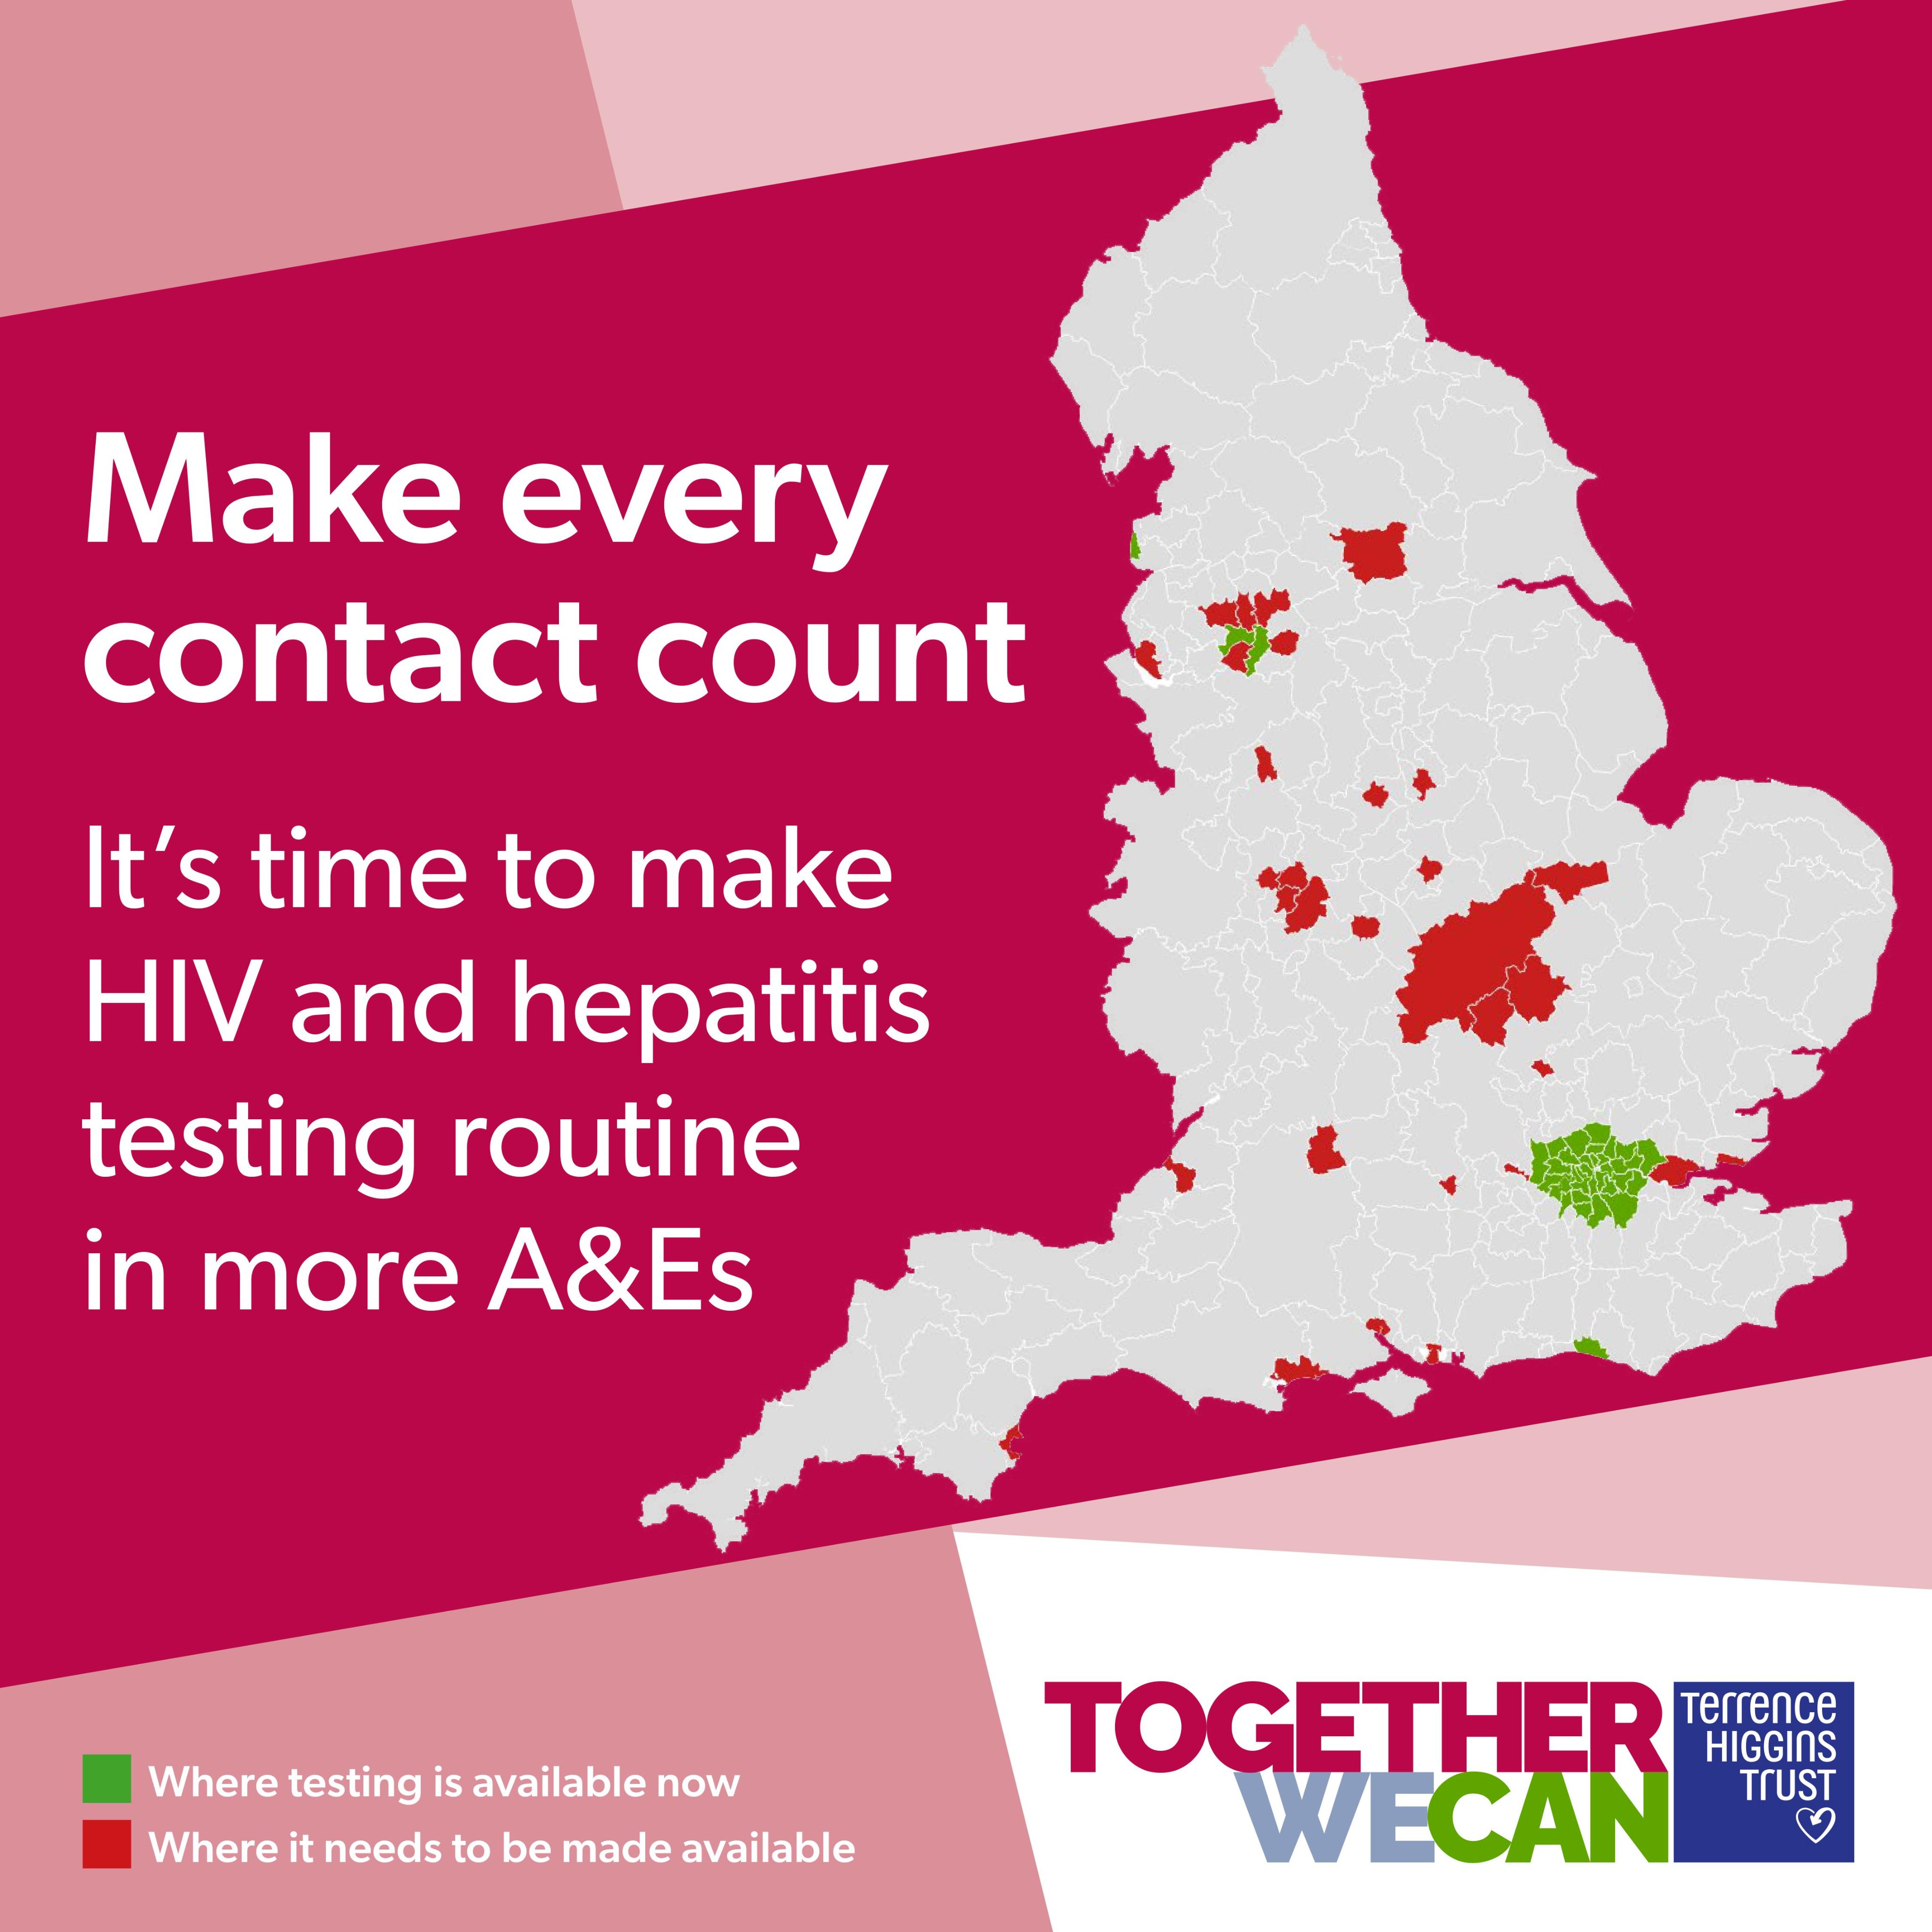 Map of England, with text "Make every contact coount - it's time to make HIV and hepatitis testing routine in more A&Es"